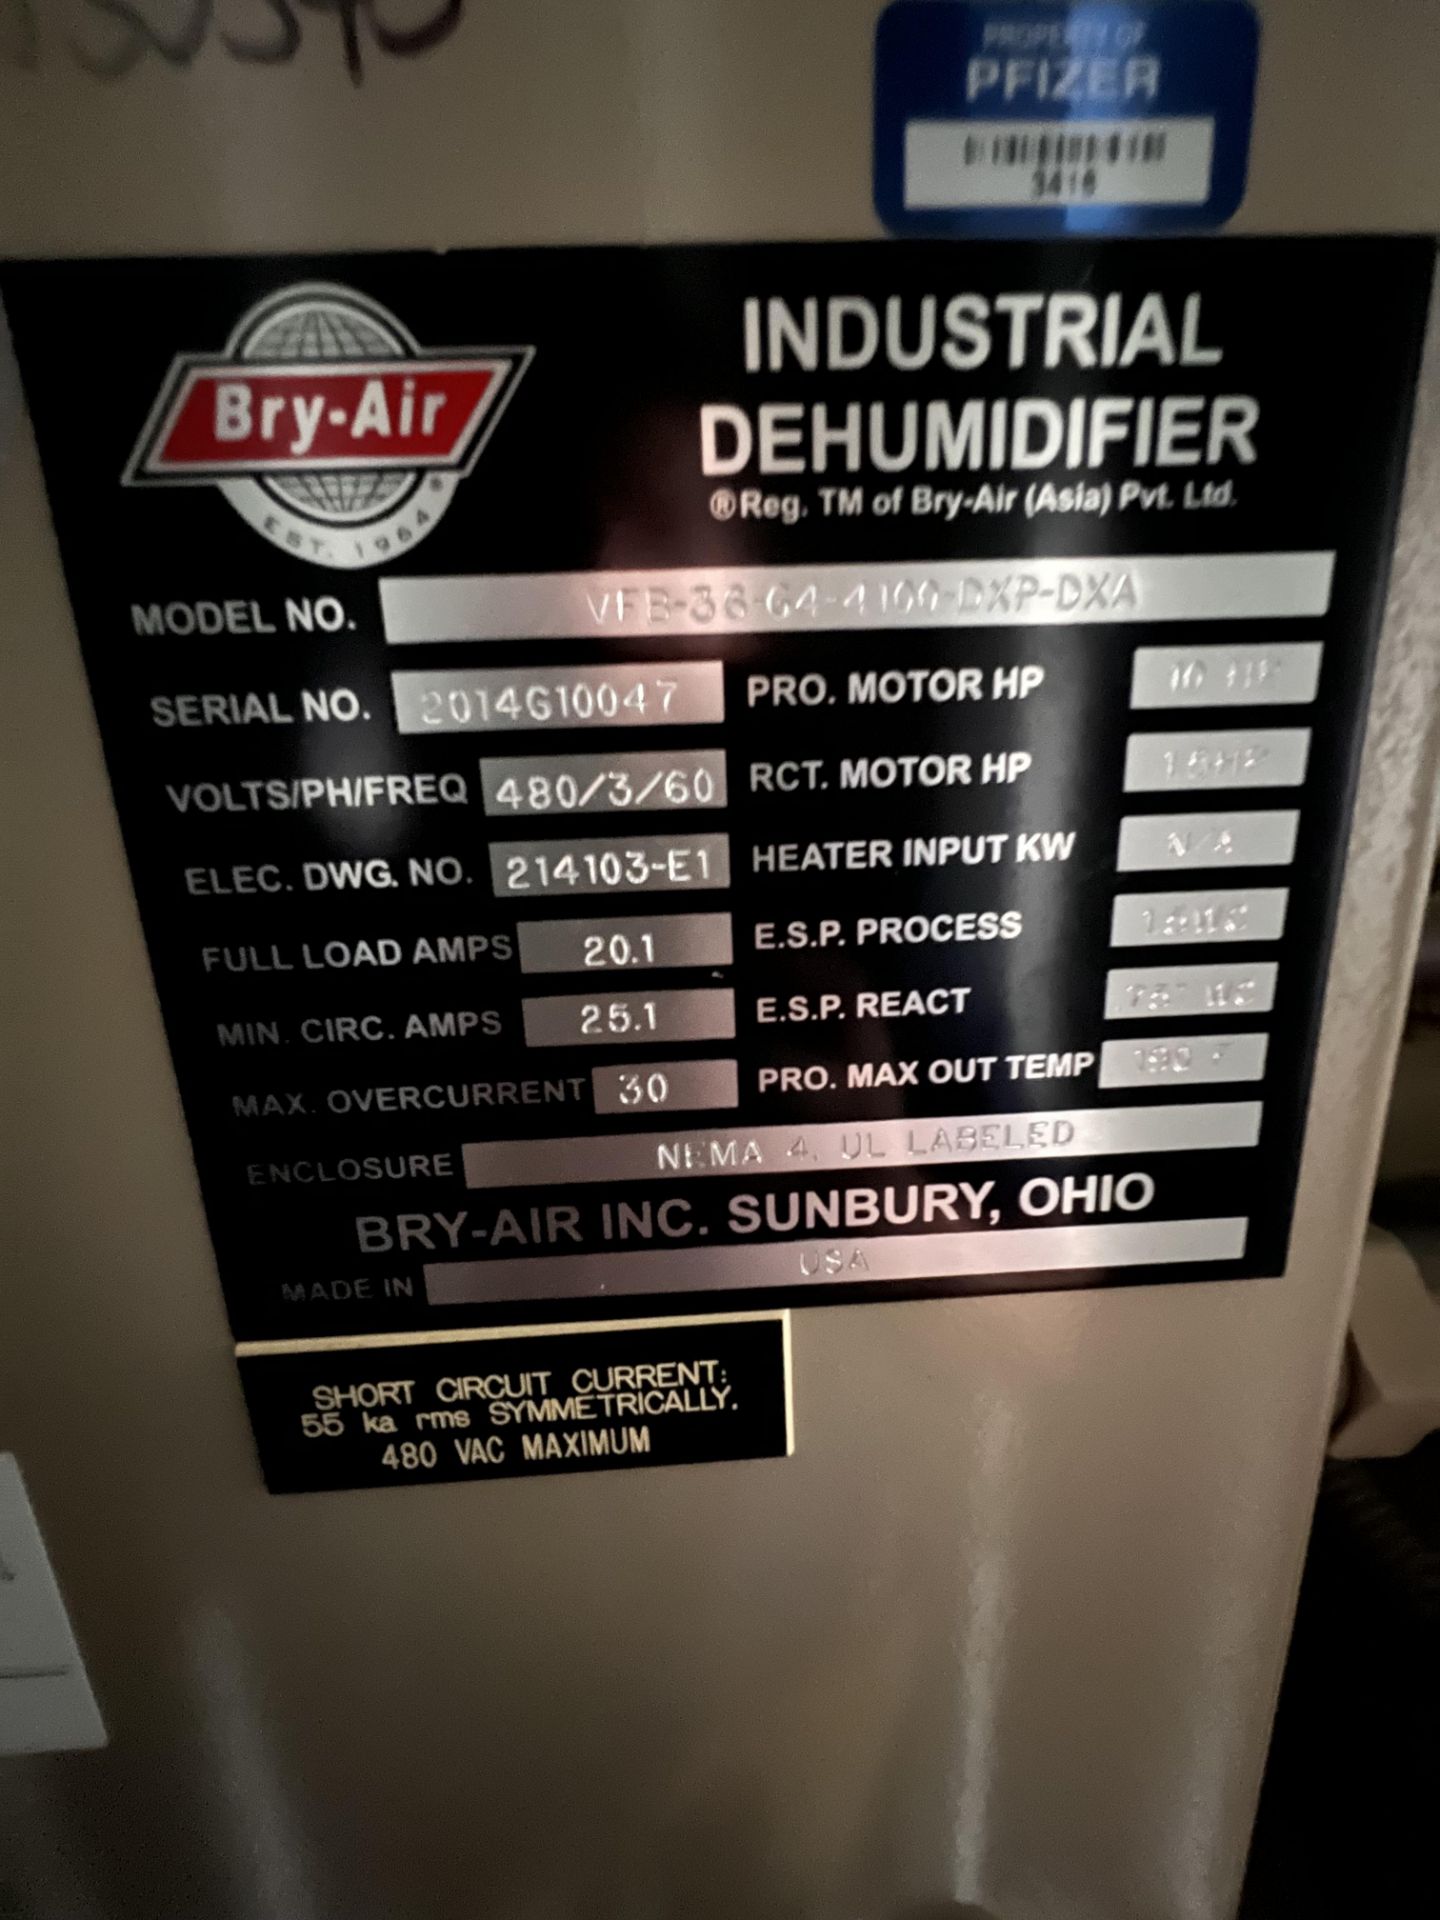 BRY-AIR INDUSTRIAL DEHUMIDIFIER, MODEL VFB-36-G-4100-DXP-DXA, S/N 2015G10111, 480/3/60, INCLUDES - Image 12 of 24